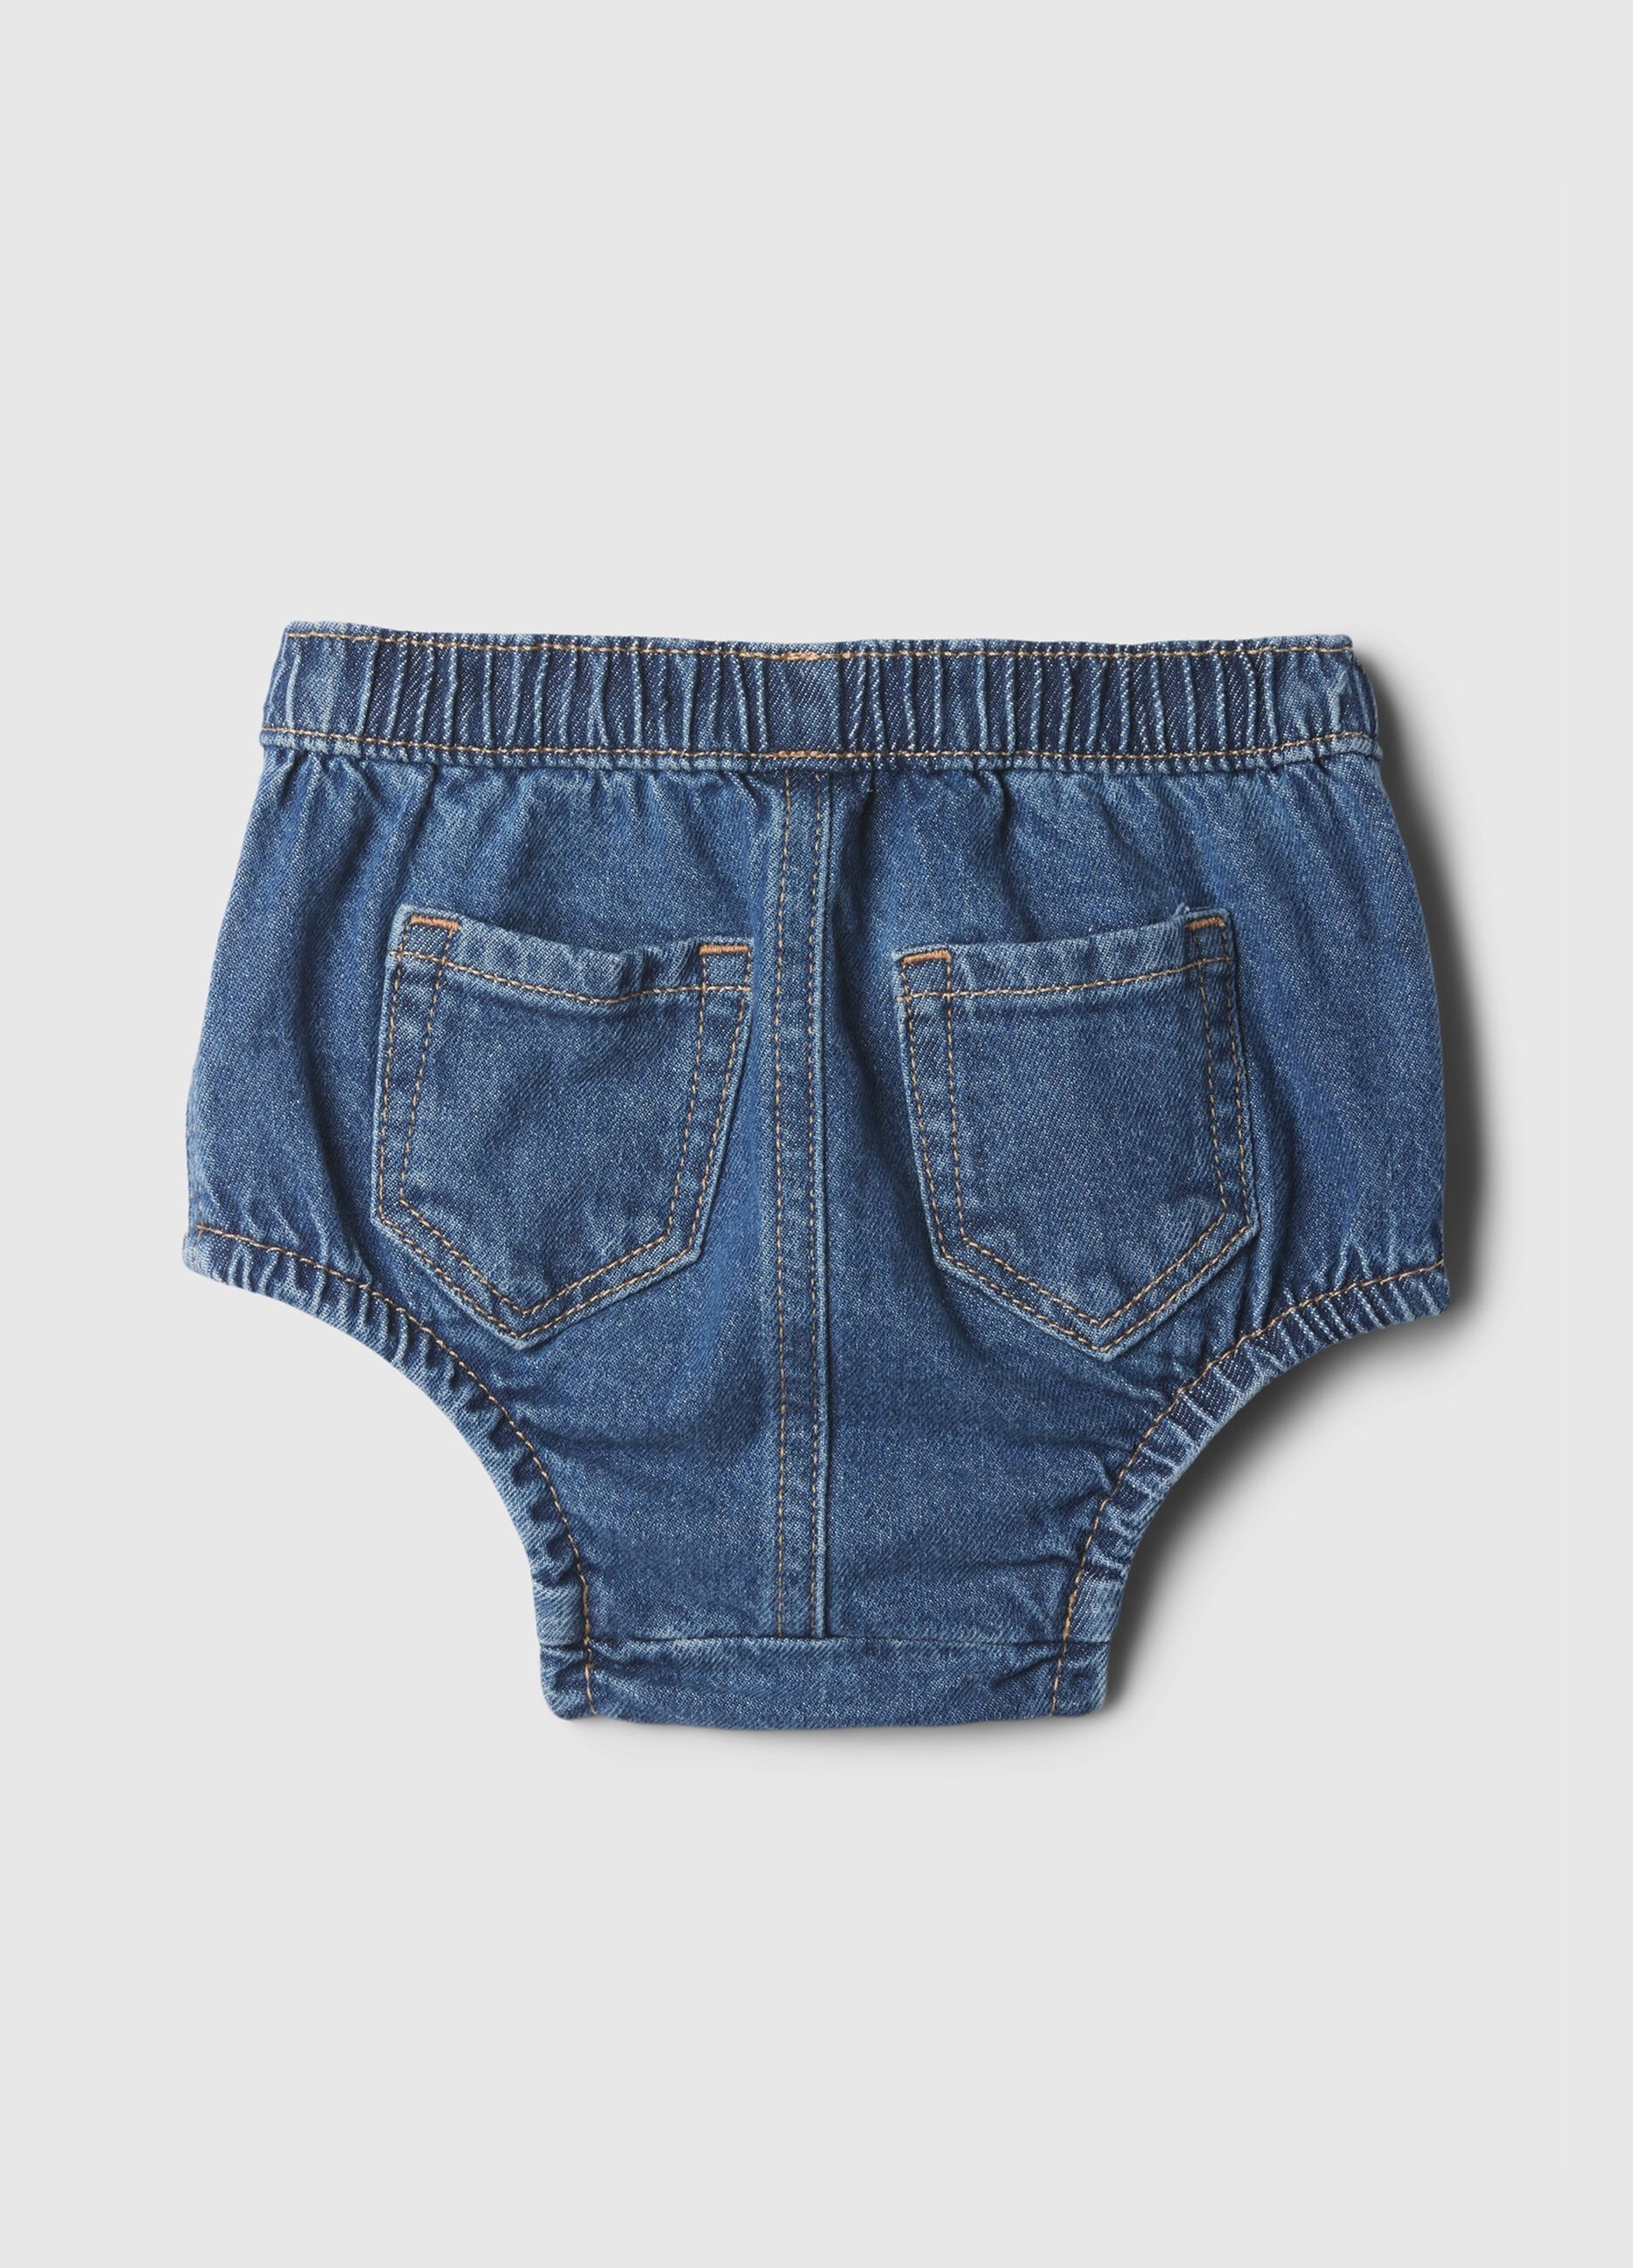 Denim French knickers with teddy bear embroidery